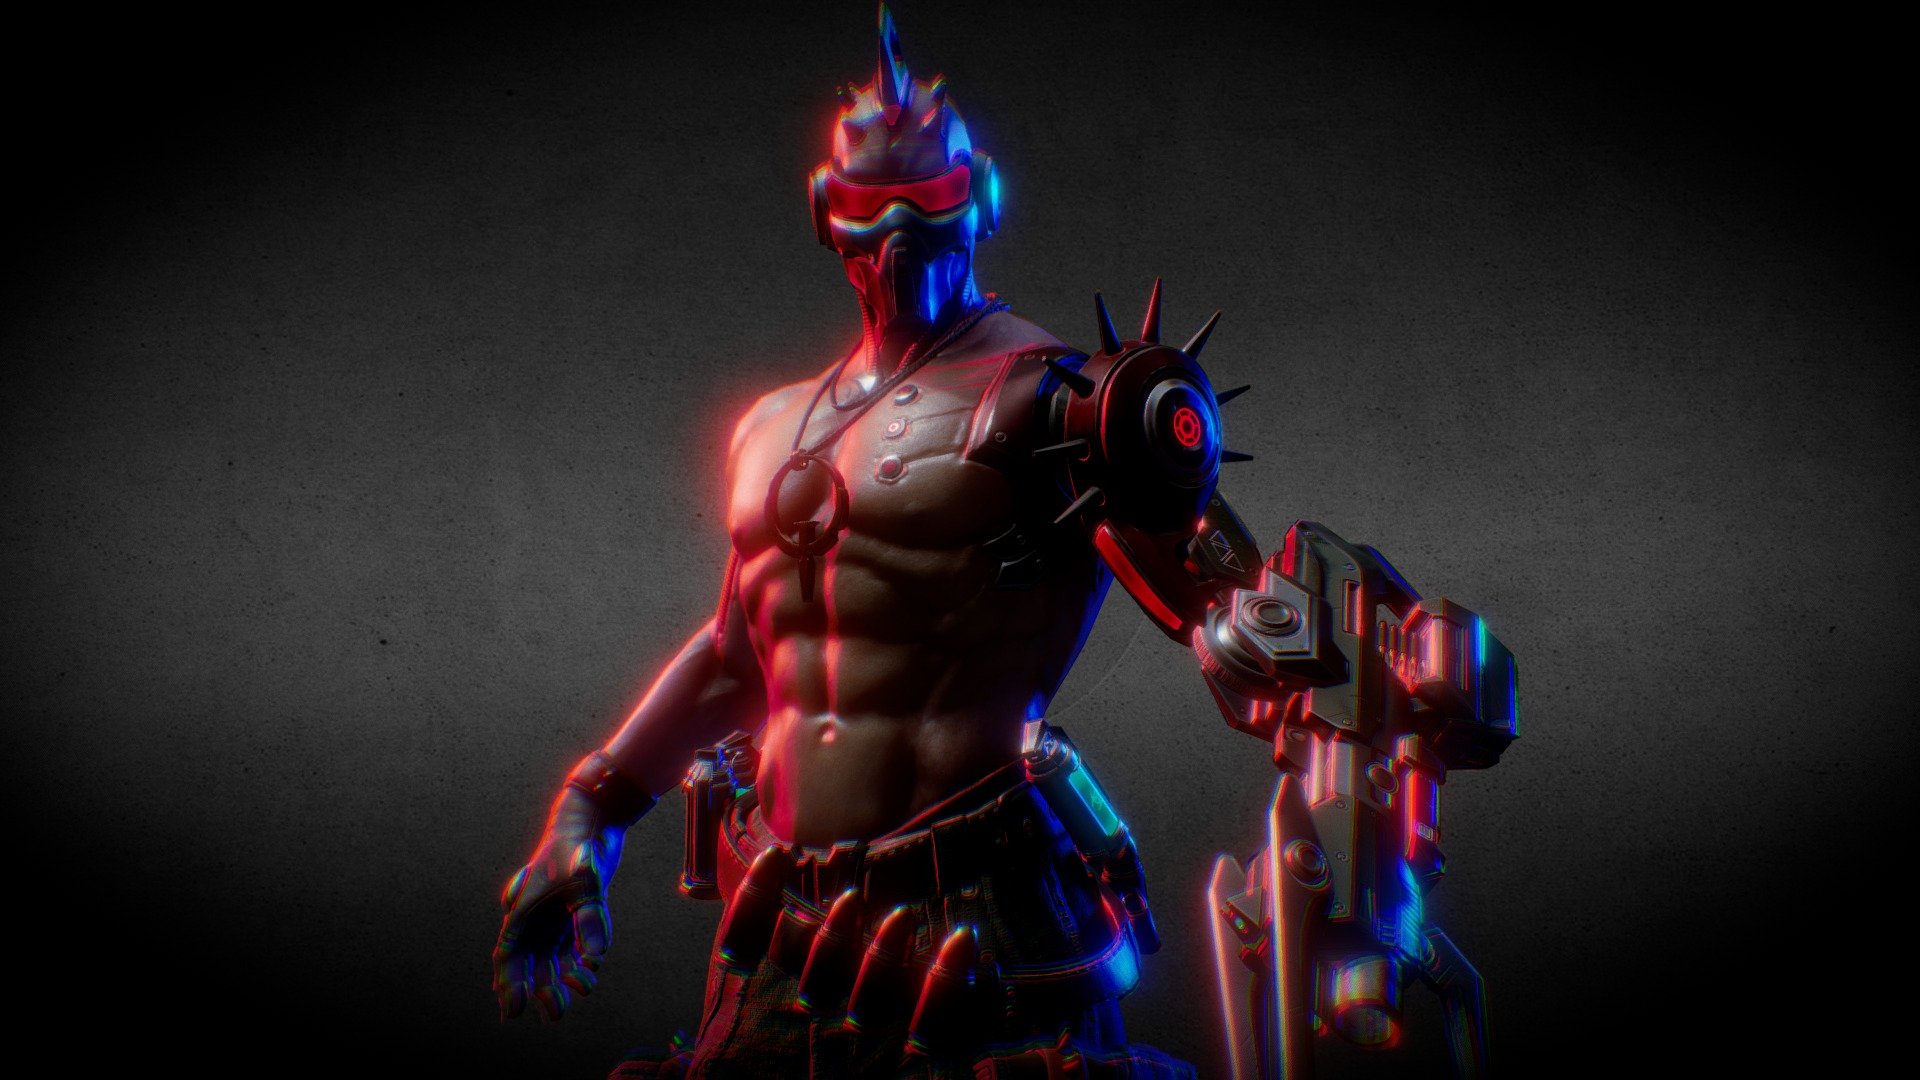 https://www.artstation.com/marvel_toliks

My alternative version is Anarki. I am a big fan of cyberpunk setting, so I decided to make a small personal project in this style. Also in the course of this work, I tried to improve my skills in character design and animation 3d model